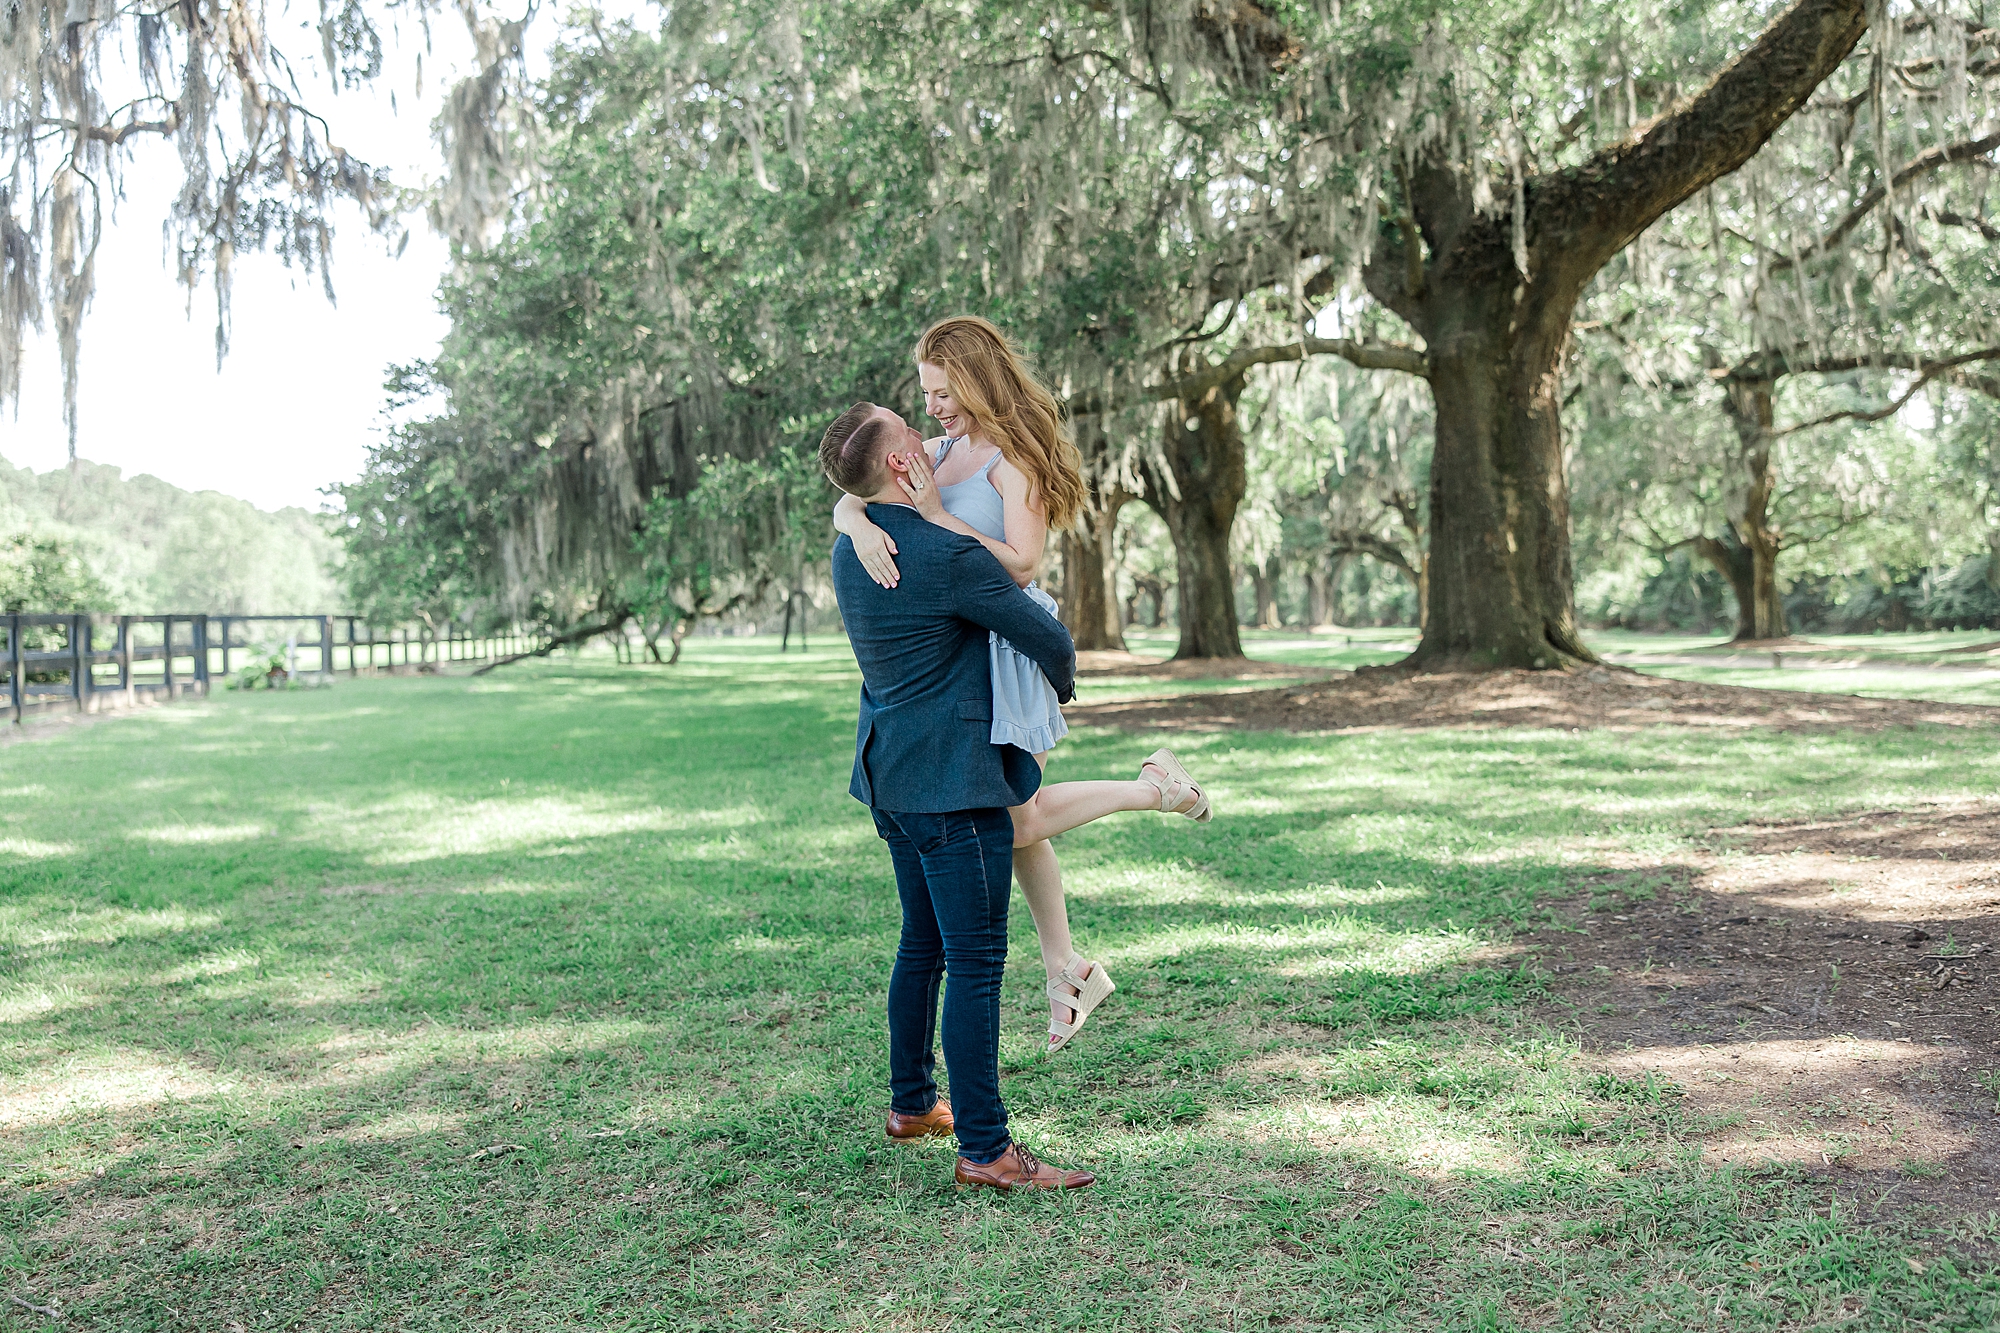 guy lifts his fiancé after Romantic Surprise Proposal at Boone Hall